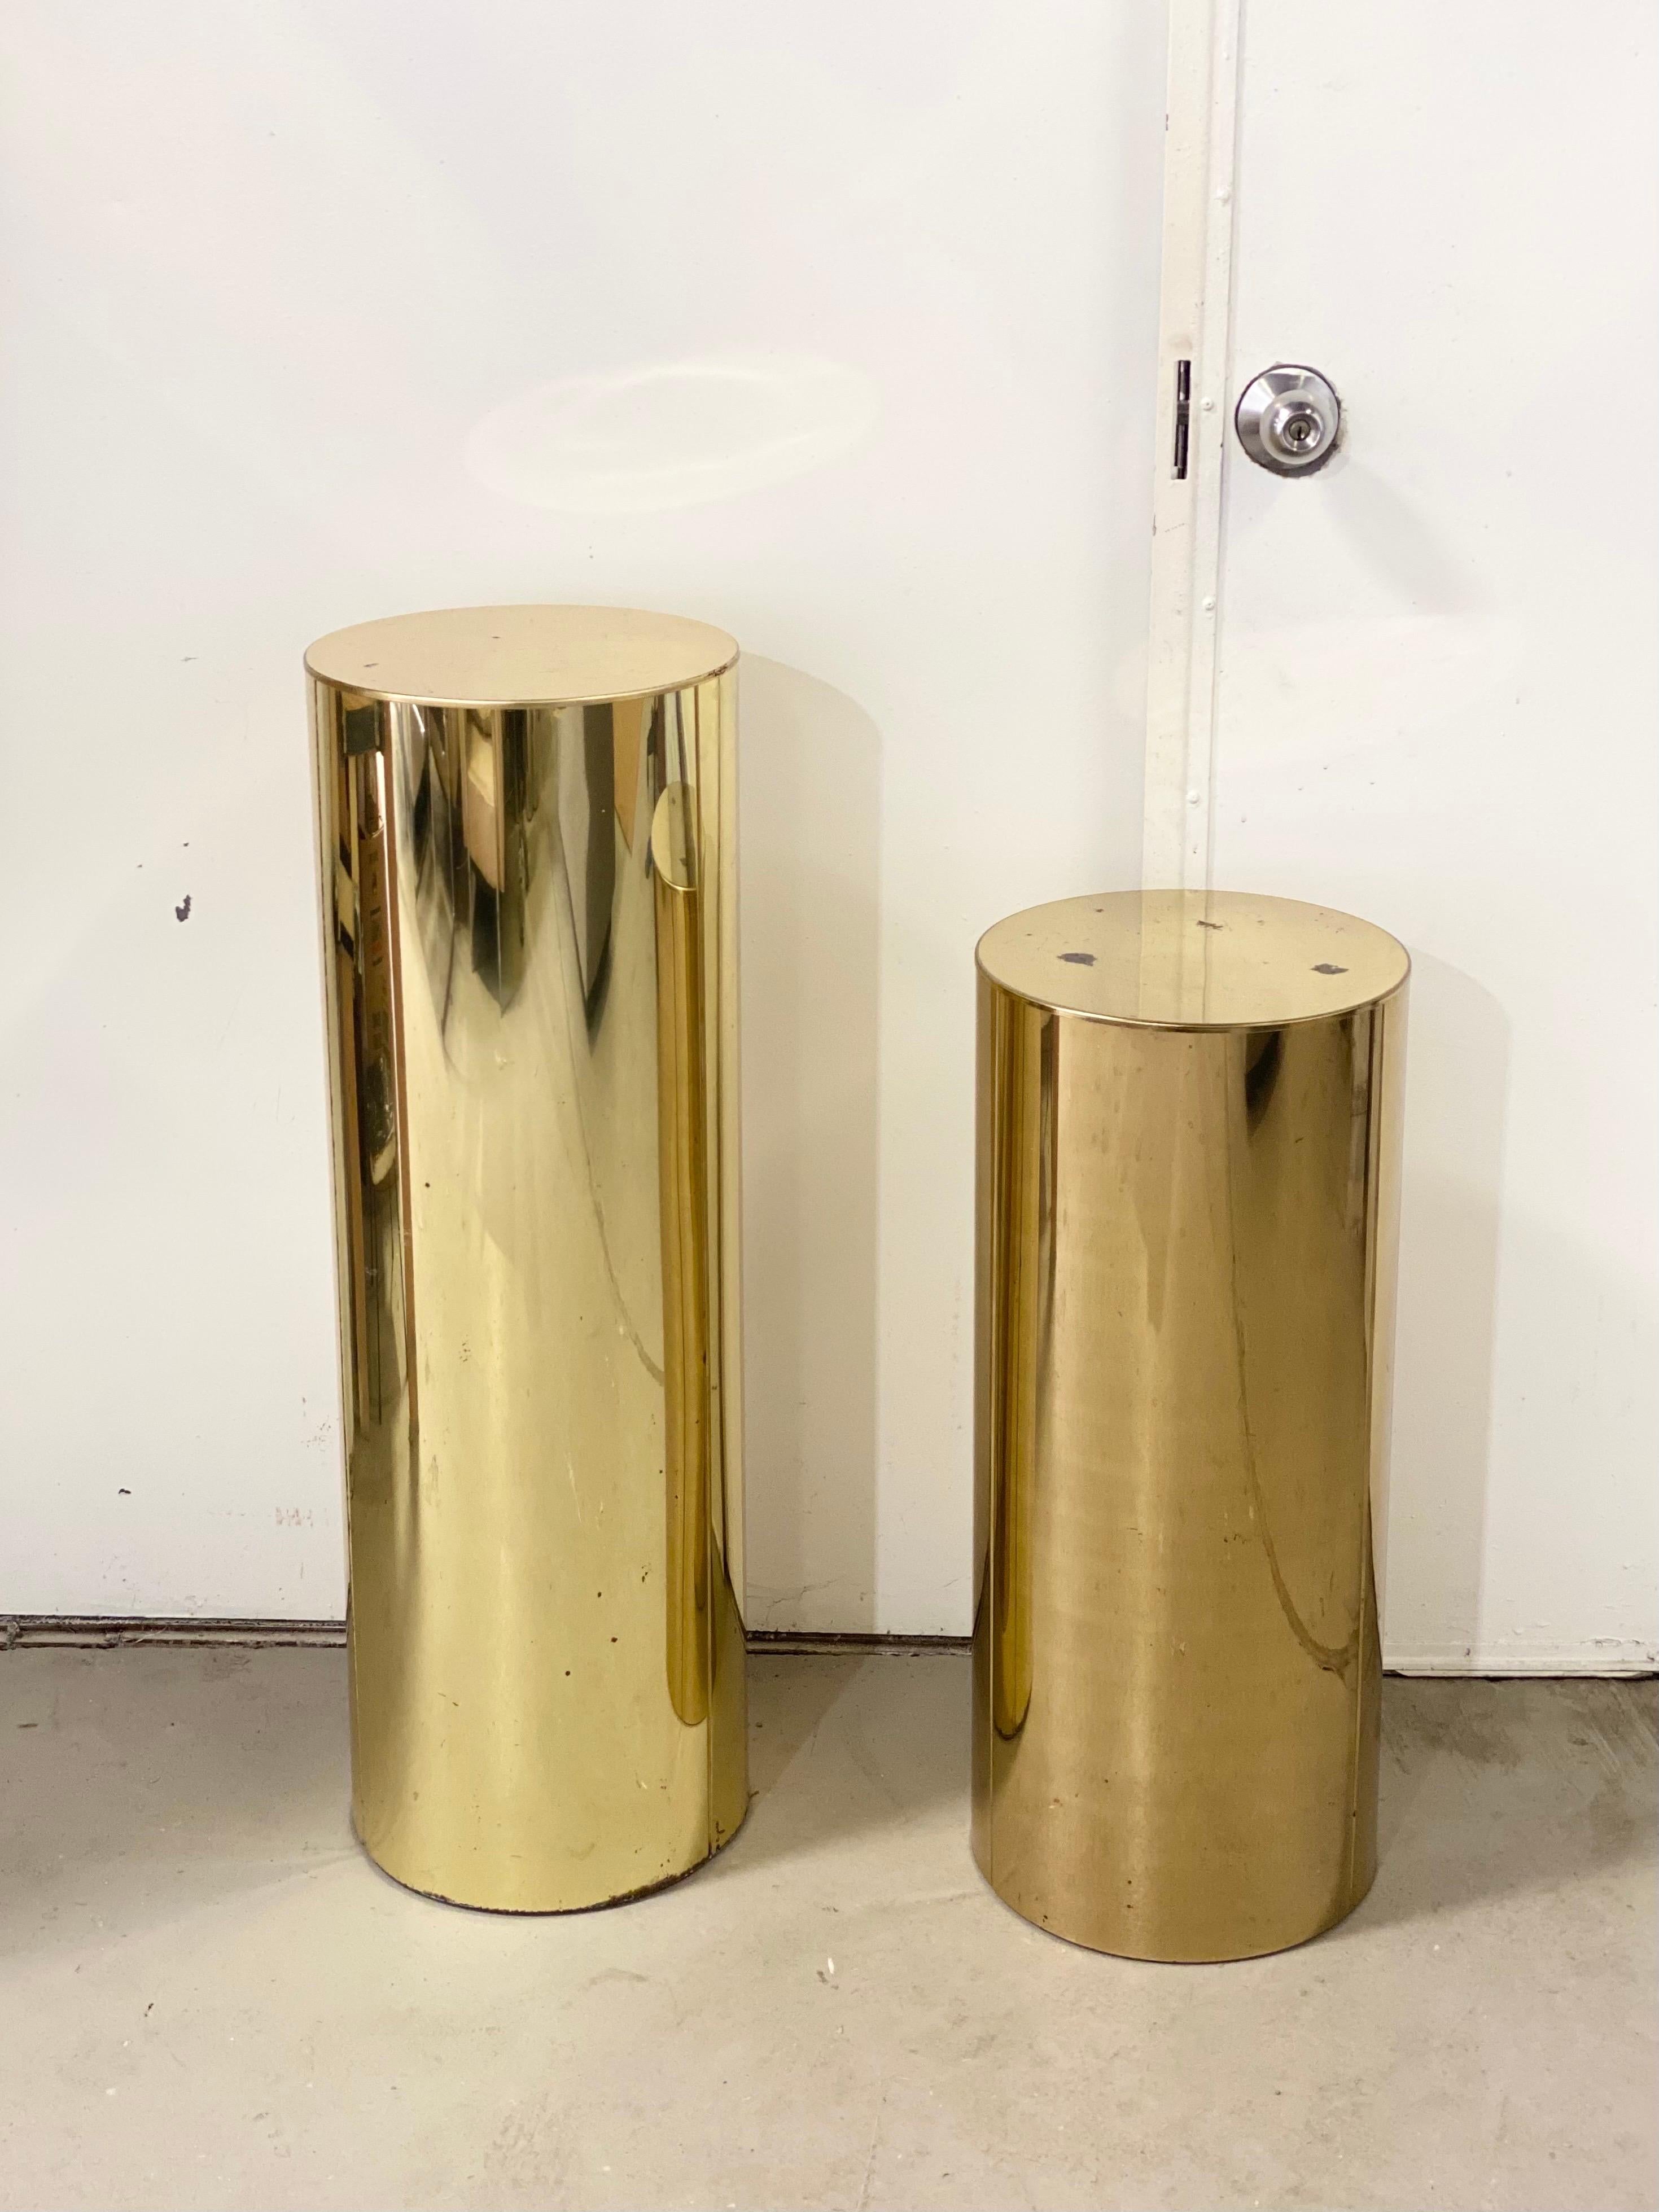 We are very pleased to offer a set of two modern pedestals by Curtis Jere, circa the 1980s. These brass cylinders with a shiny, reflective surface are a Classic midcentury design and a testament to modern simplicity. The pedestals provide an elegant